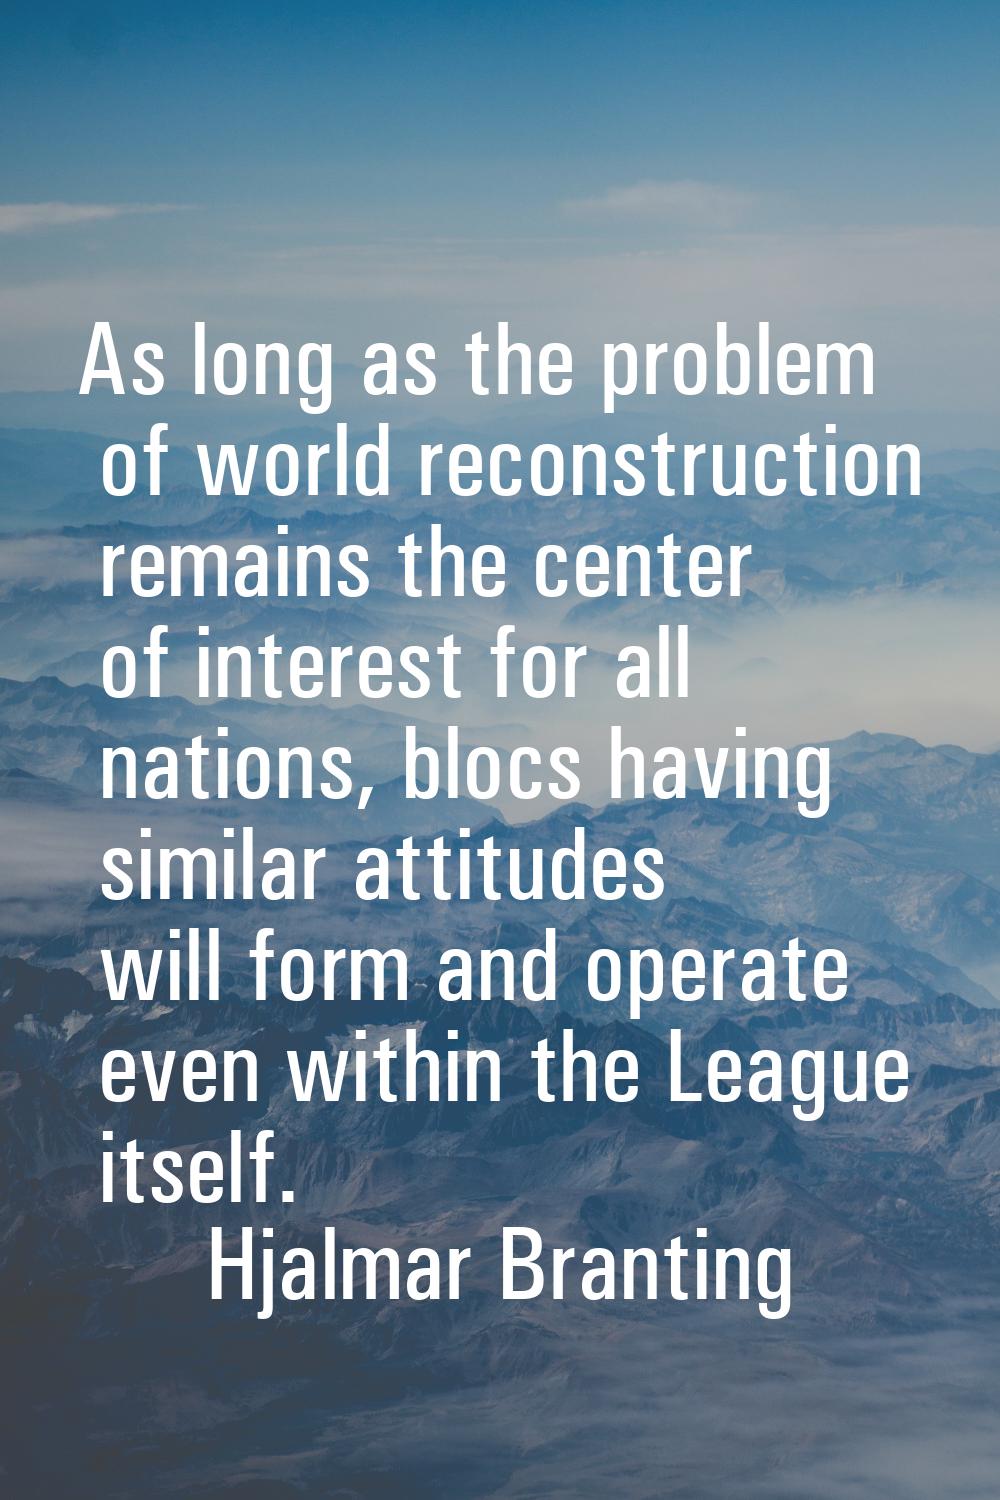 As long as the problem of world reconstruction remains the center of interest for all nations, bloc